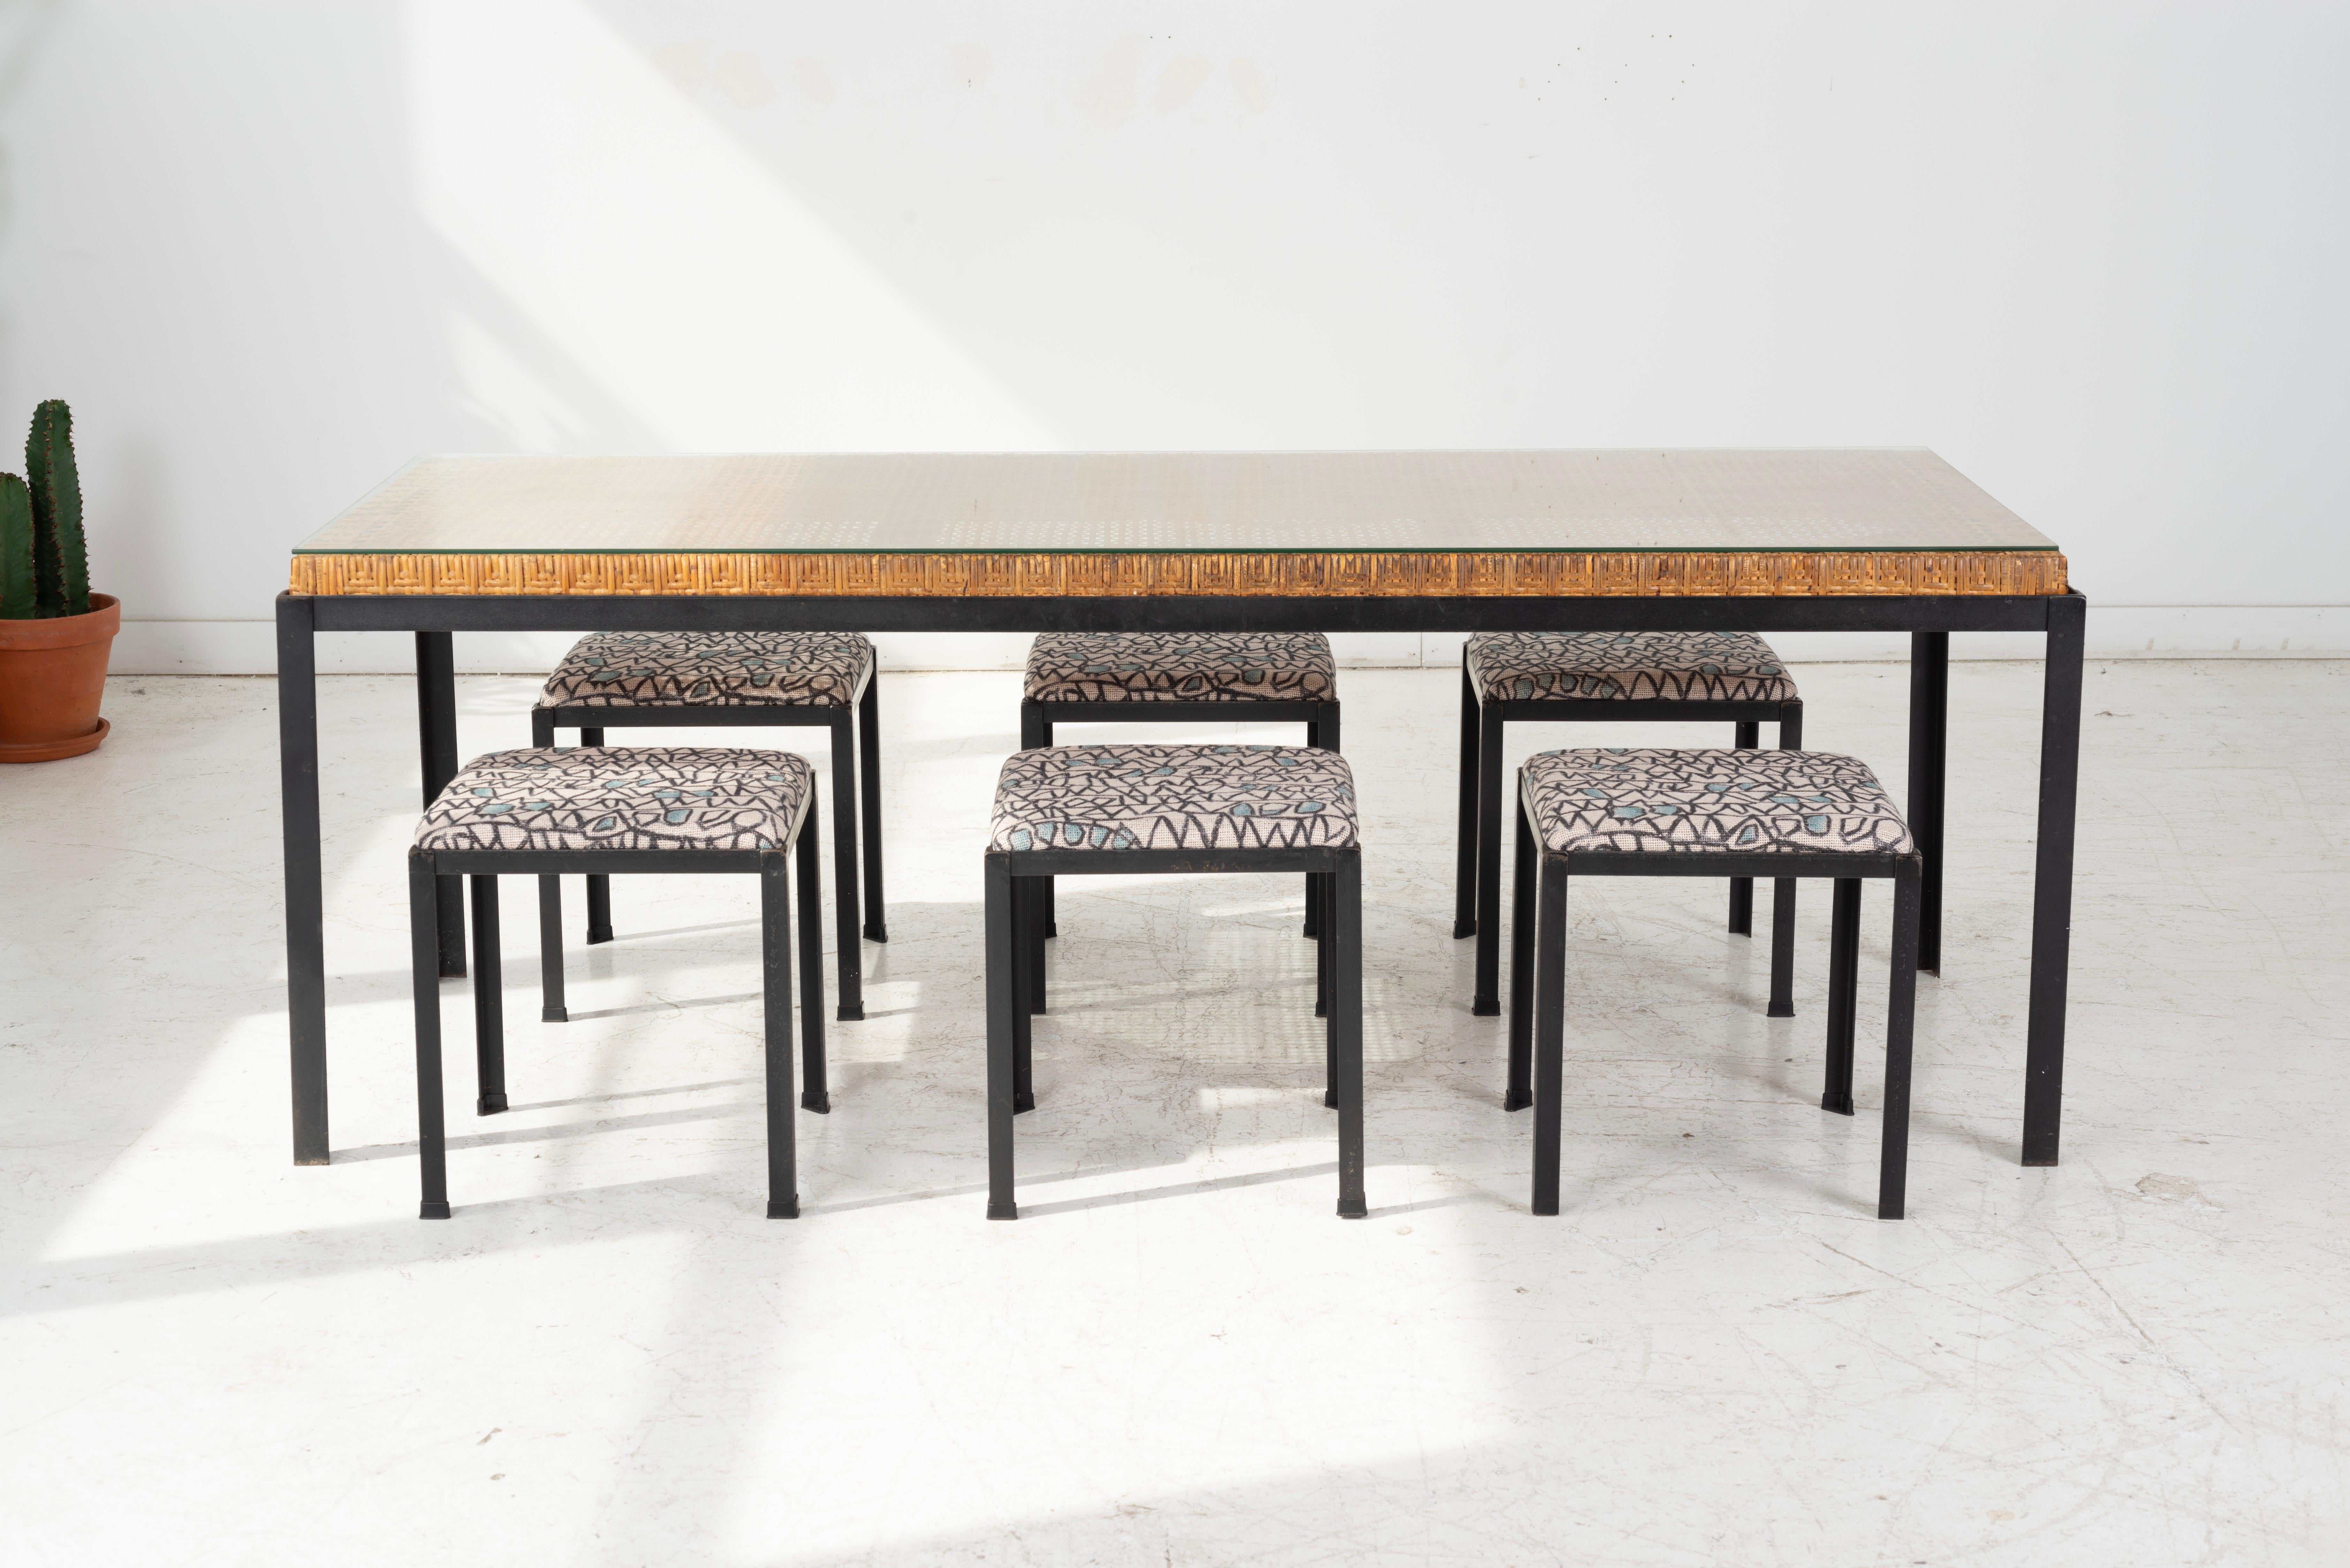 Danny Ho Fong, the king of wicker designed this dining set with 6 stools. Dining table base and stools are made of iron.  The table top is a strong wicker structure, with a thin glass top.  Stools have been Newley upholstered with a patterned canvas